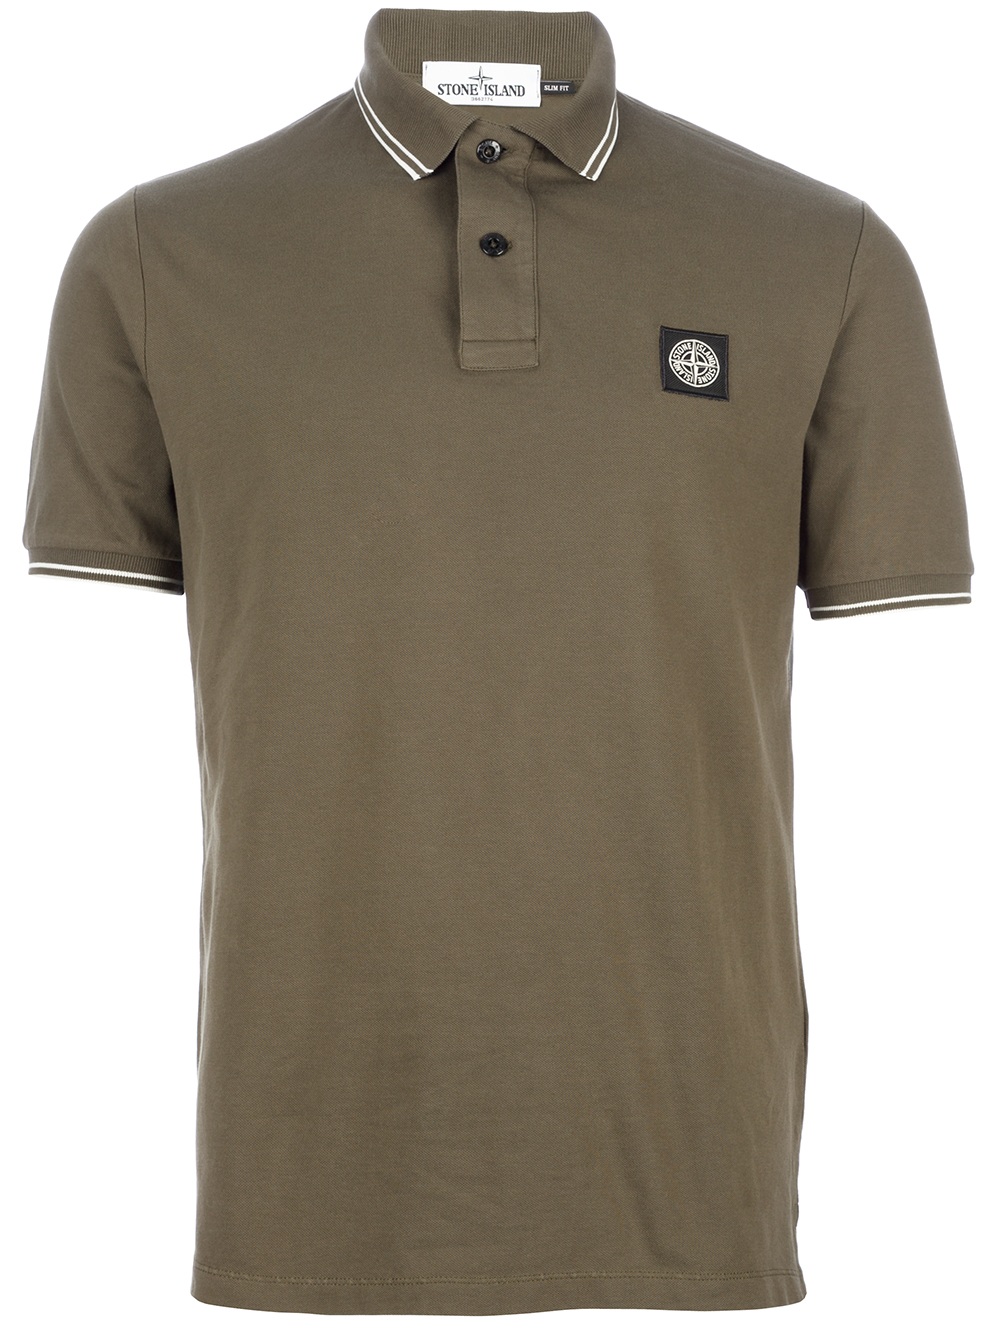 Stone Island Polo Shirt in Olive (Green) for Men - Lyst